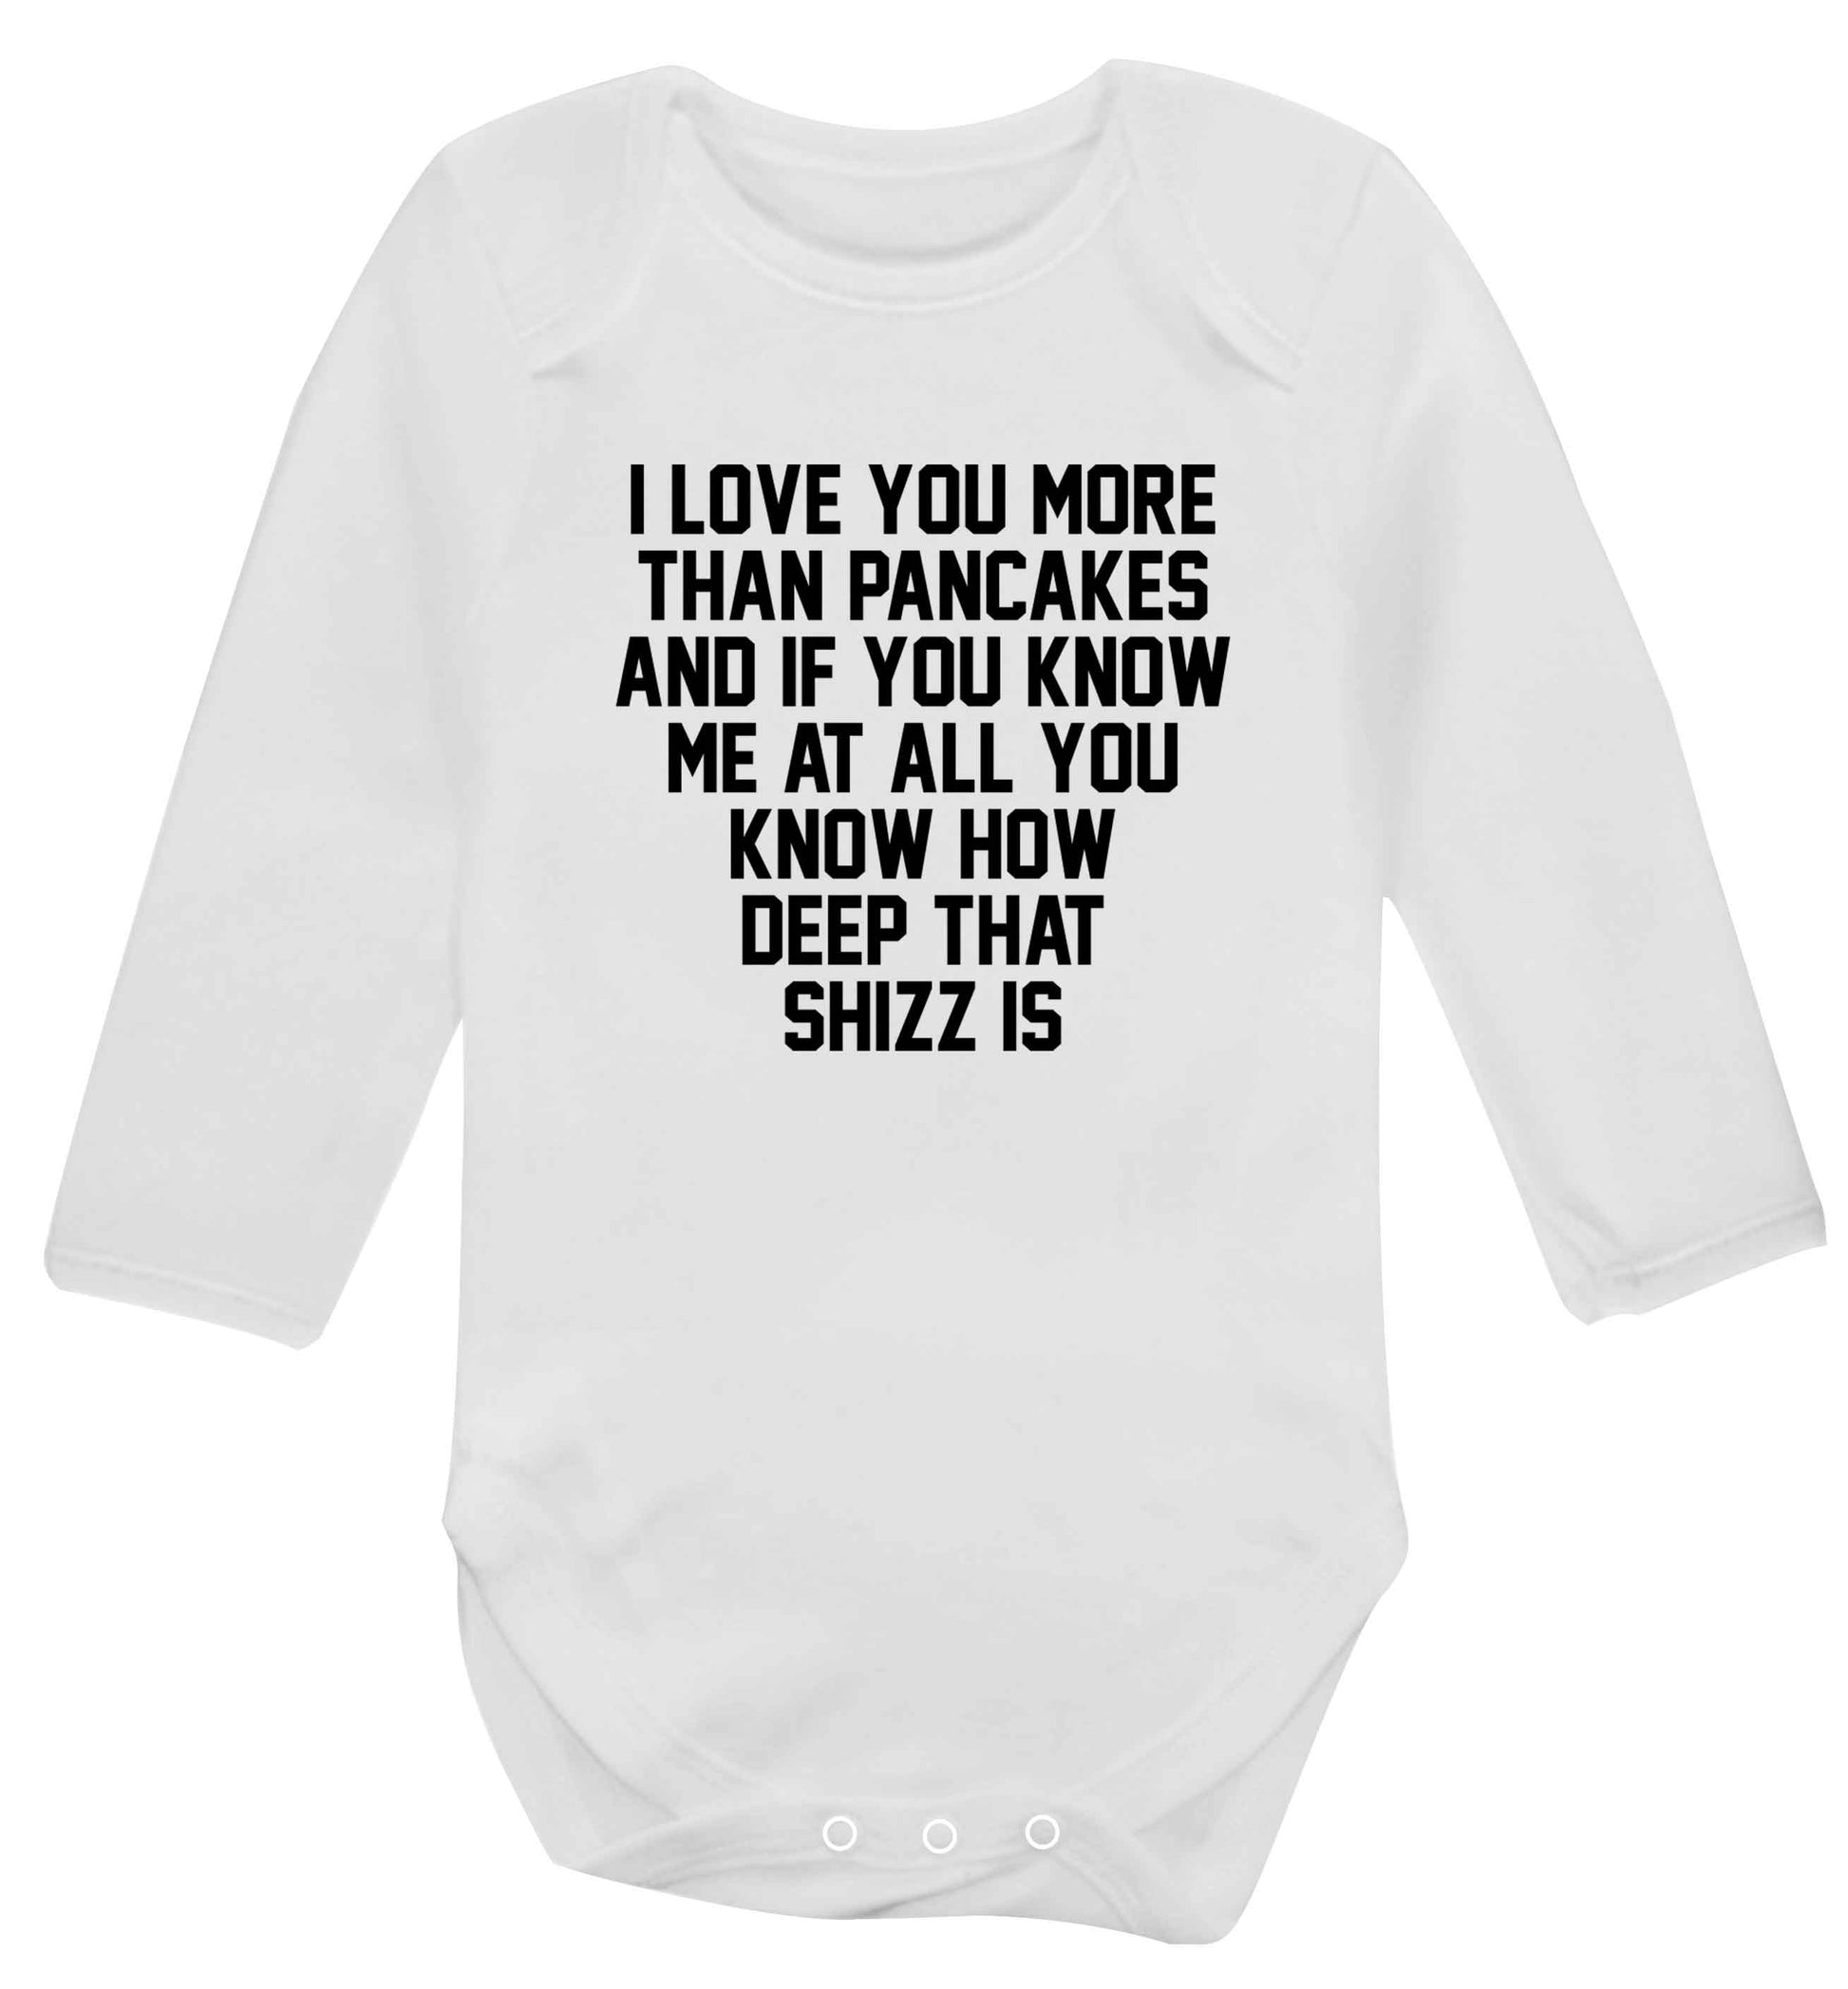 I love you more than pancakes and if you know me at all you know how deep that shizz is baby vest long sleeved white 6-12 months